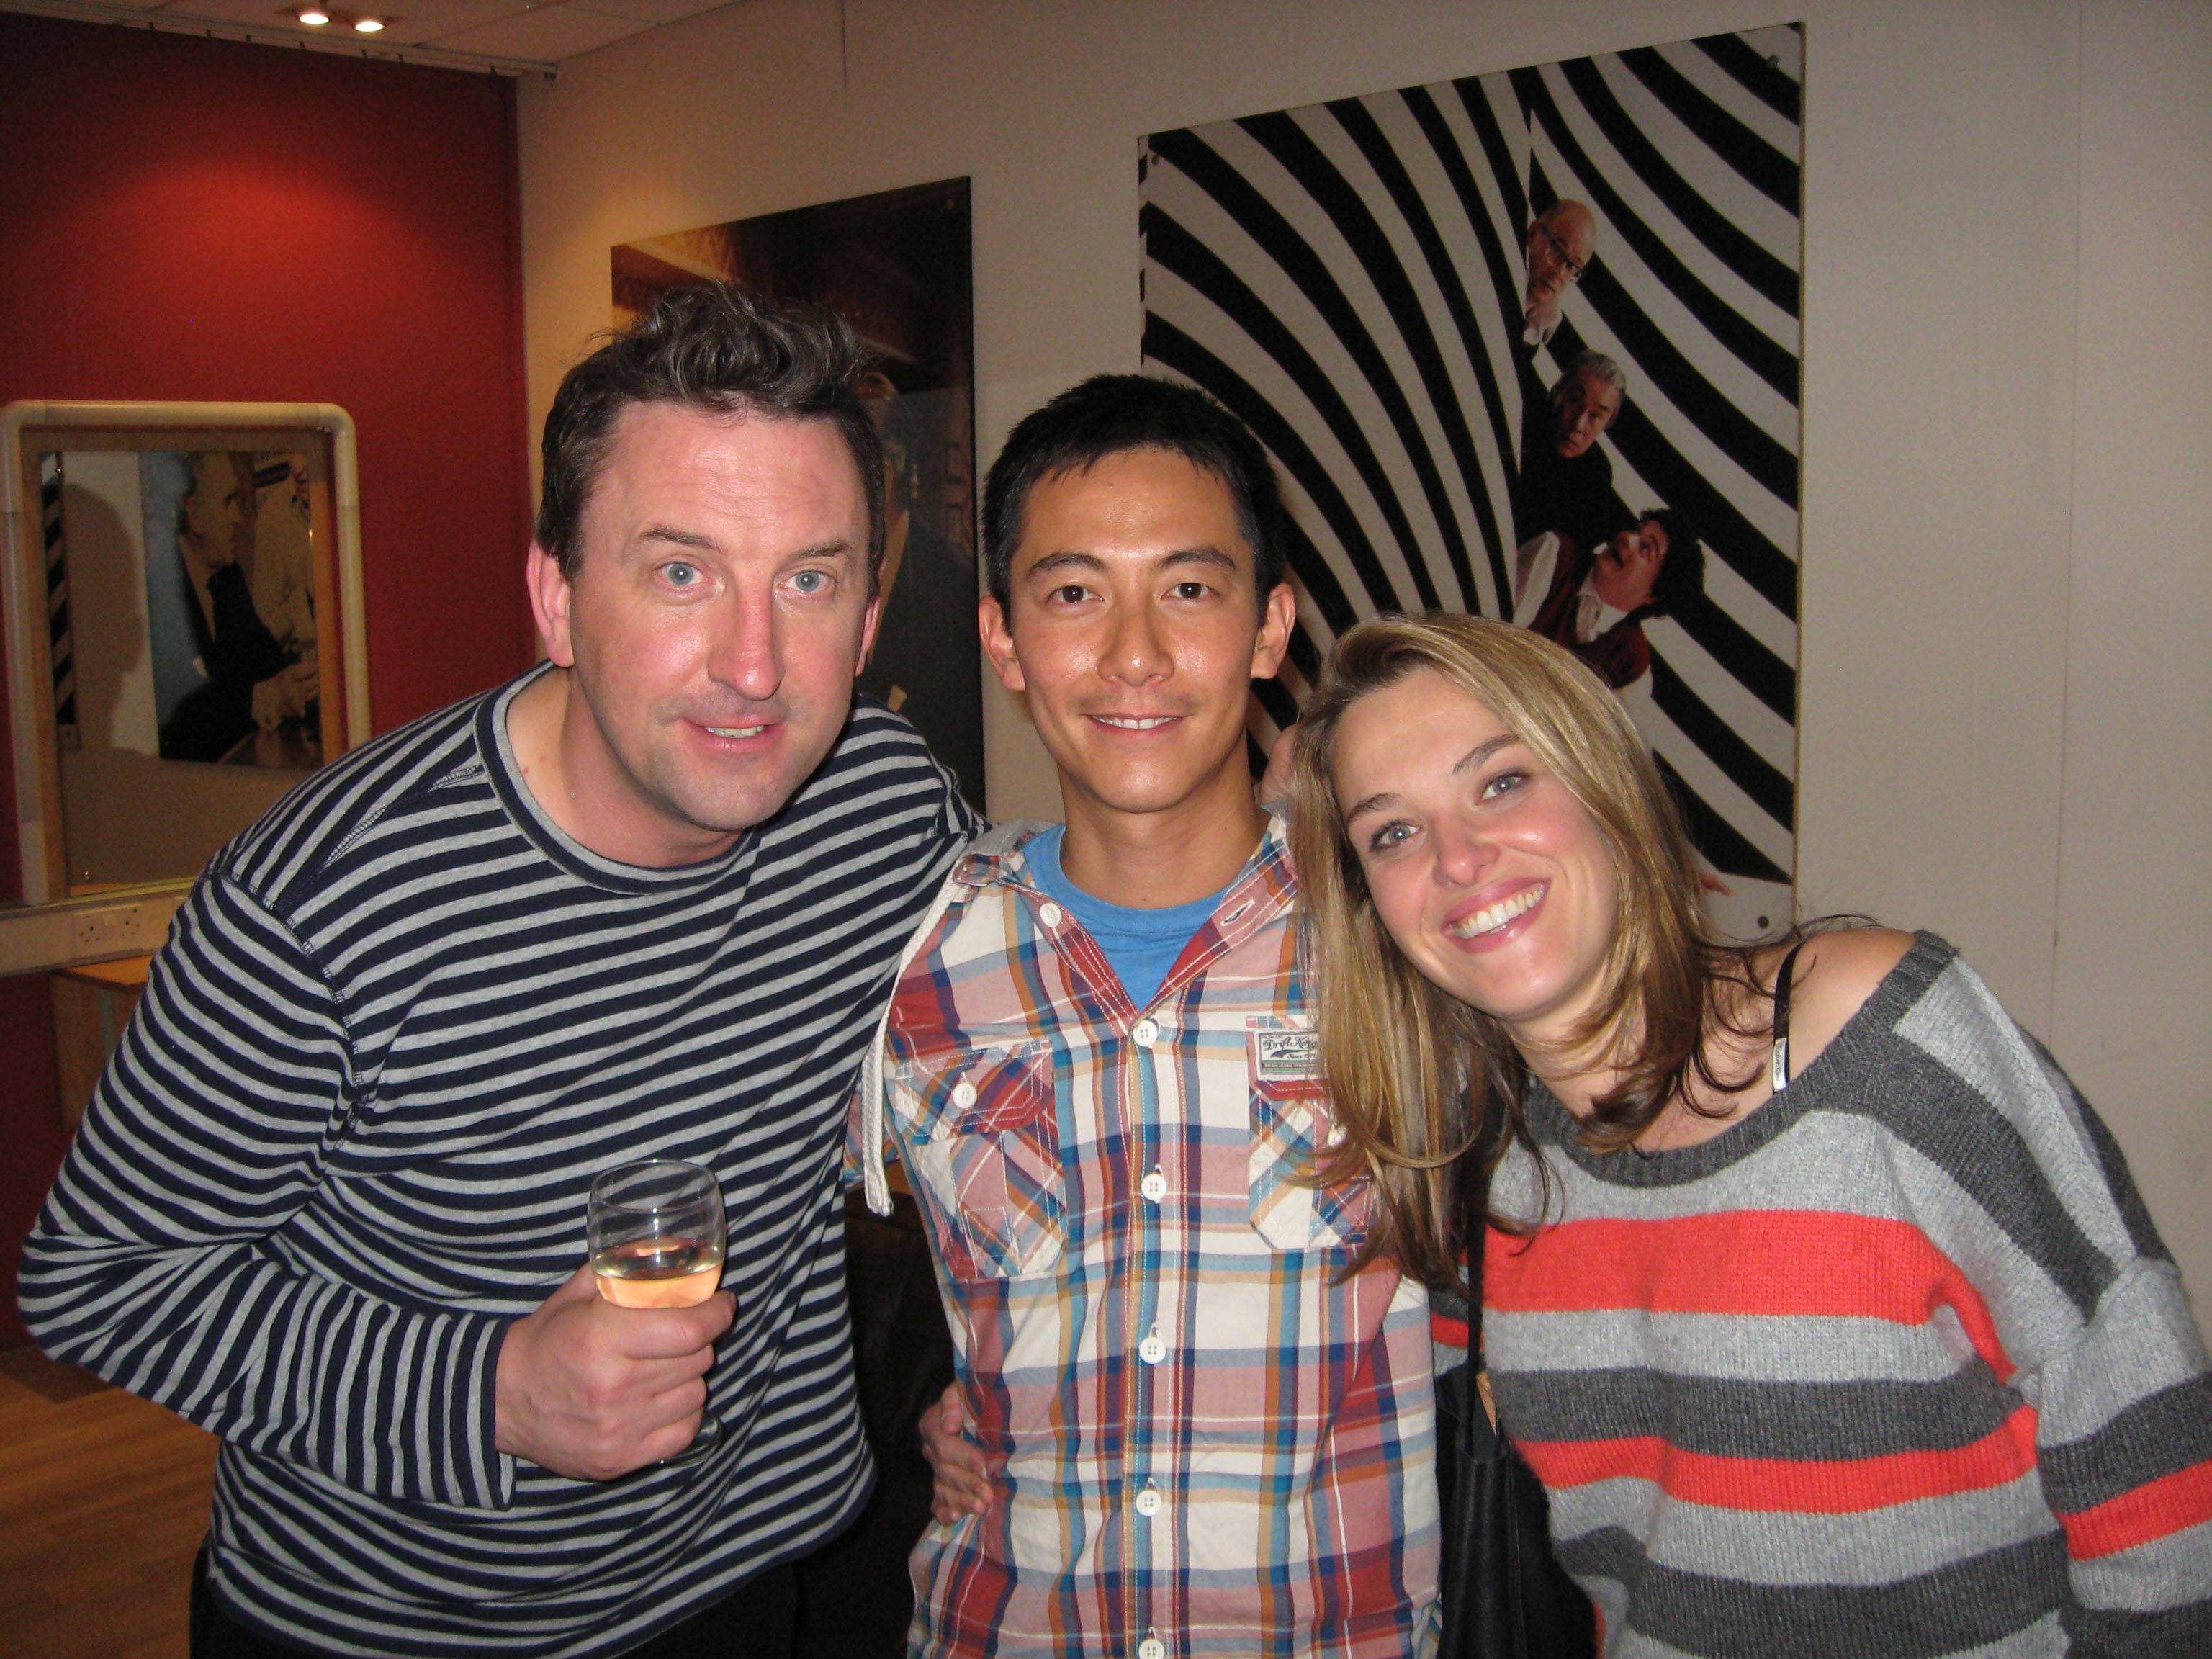 Akie Kotabe with Lee Mack and Sally Bretton from BBC's Not Going Out.